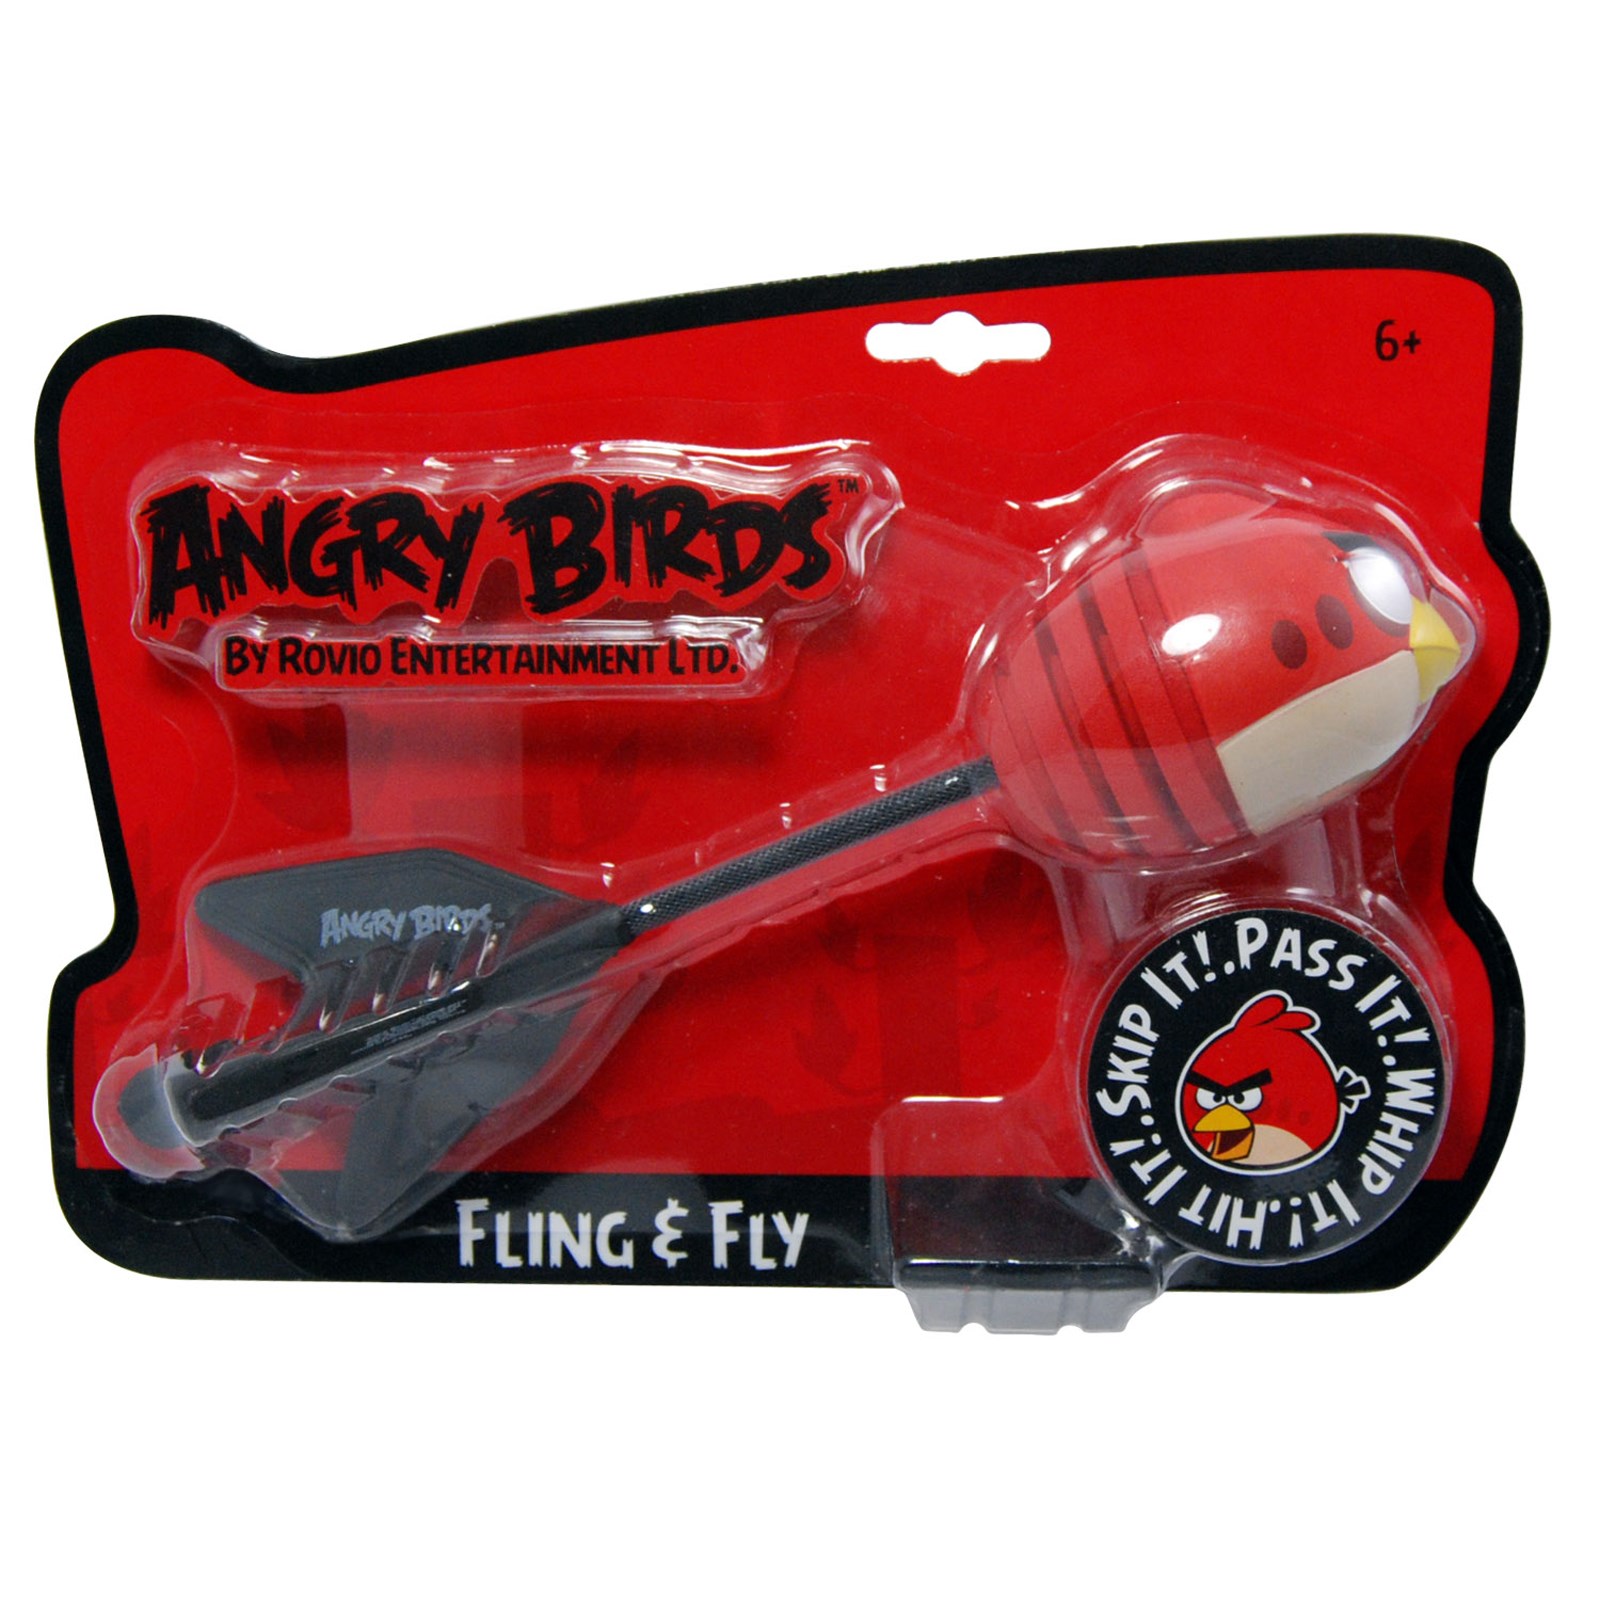 Angry Birds Fling and Fly